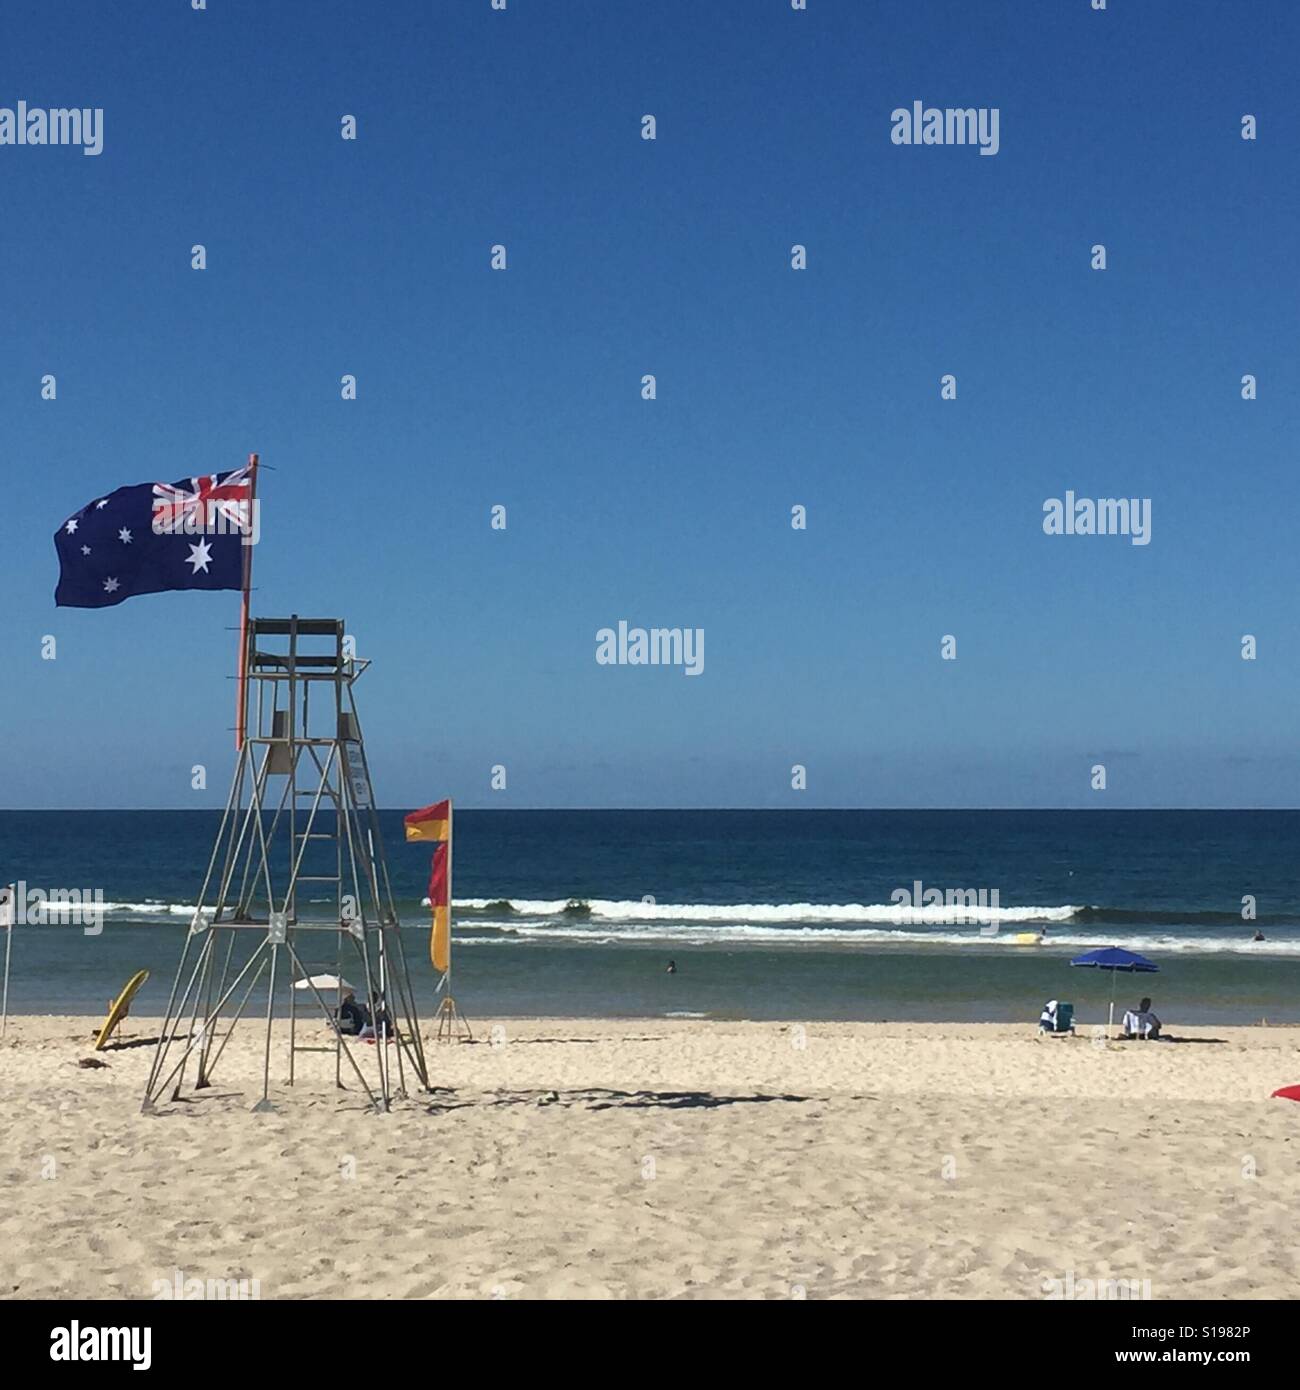 Australian flag and lifesaving flags waving on the beach at Kingscliff, New South Wales. Stock Photo